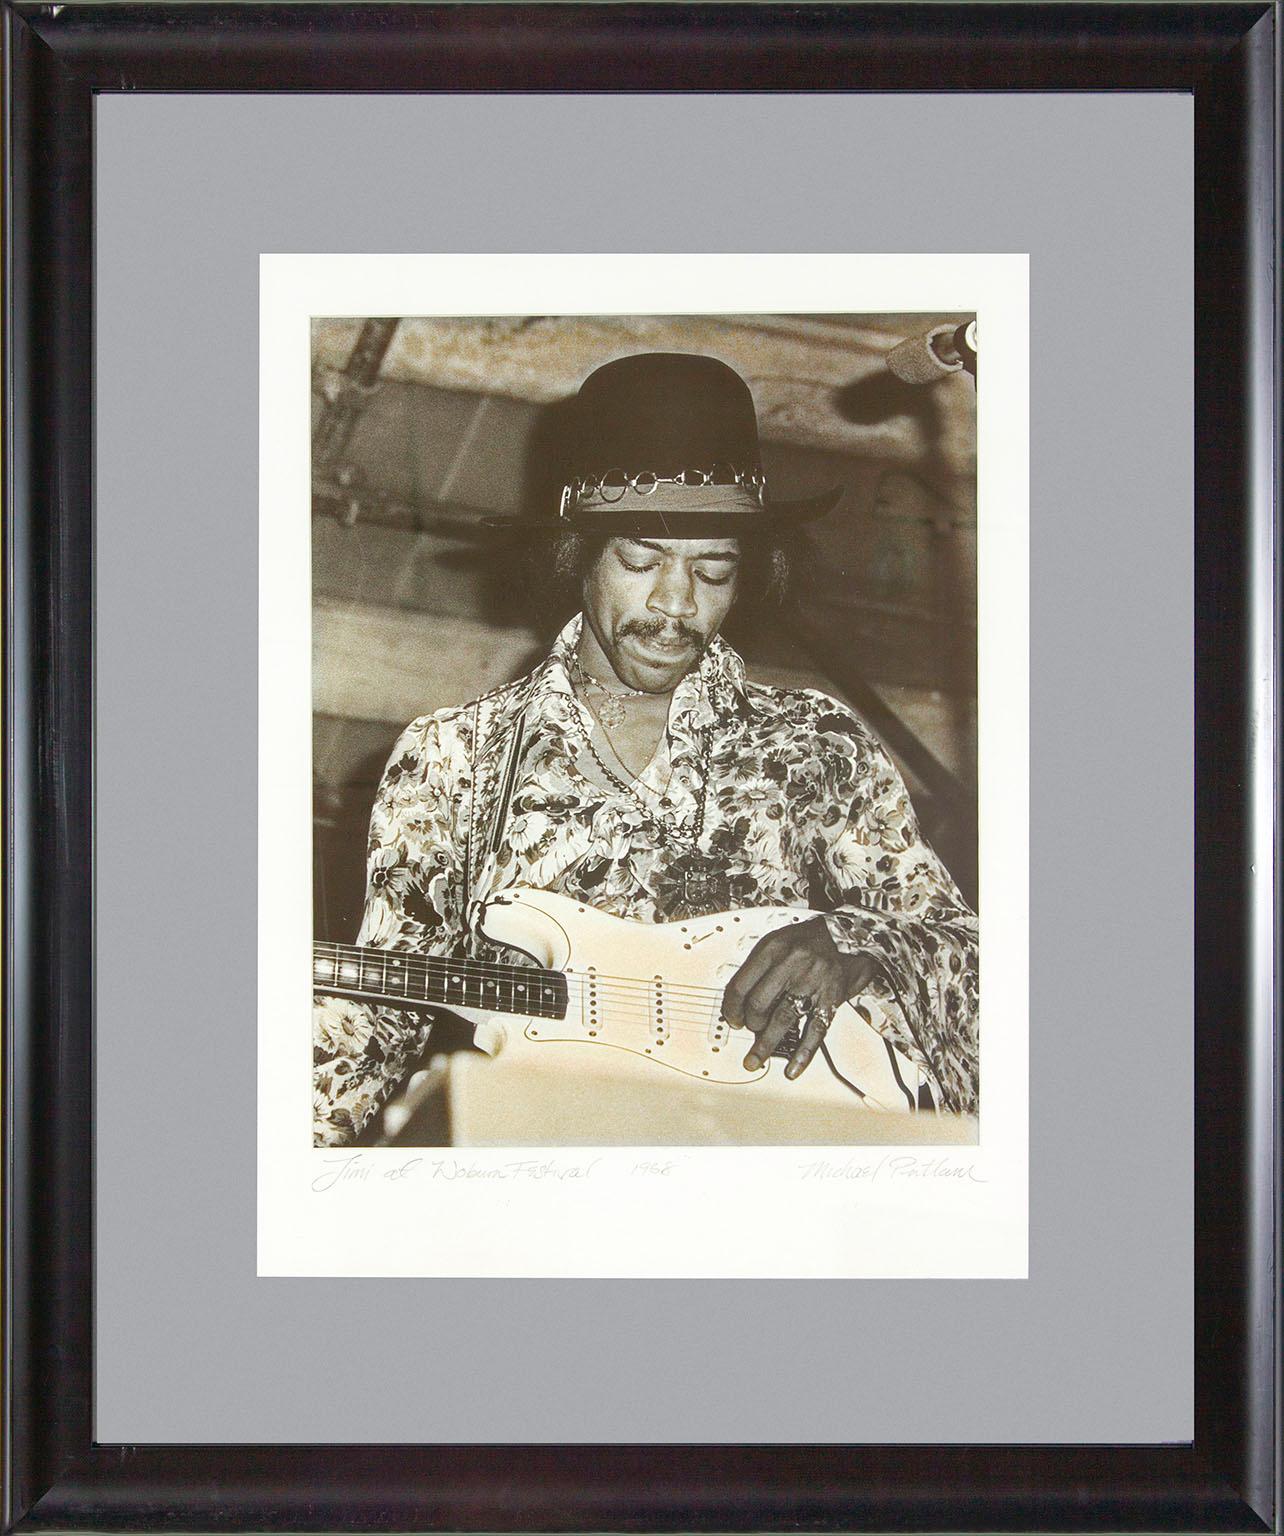 "Jimi at Woburn Festival 1968" framed black and white photograph by Michael Putland of Jimi Hendrix at the July 6, 1968, Woburn Music Festival in England. "Jimi at Woburn Festival 1968" hand written on front lower left. "Michael Putland" hand